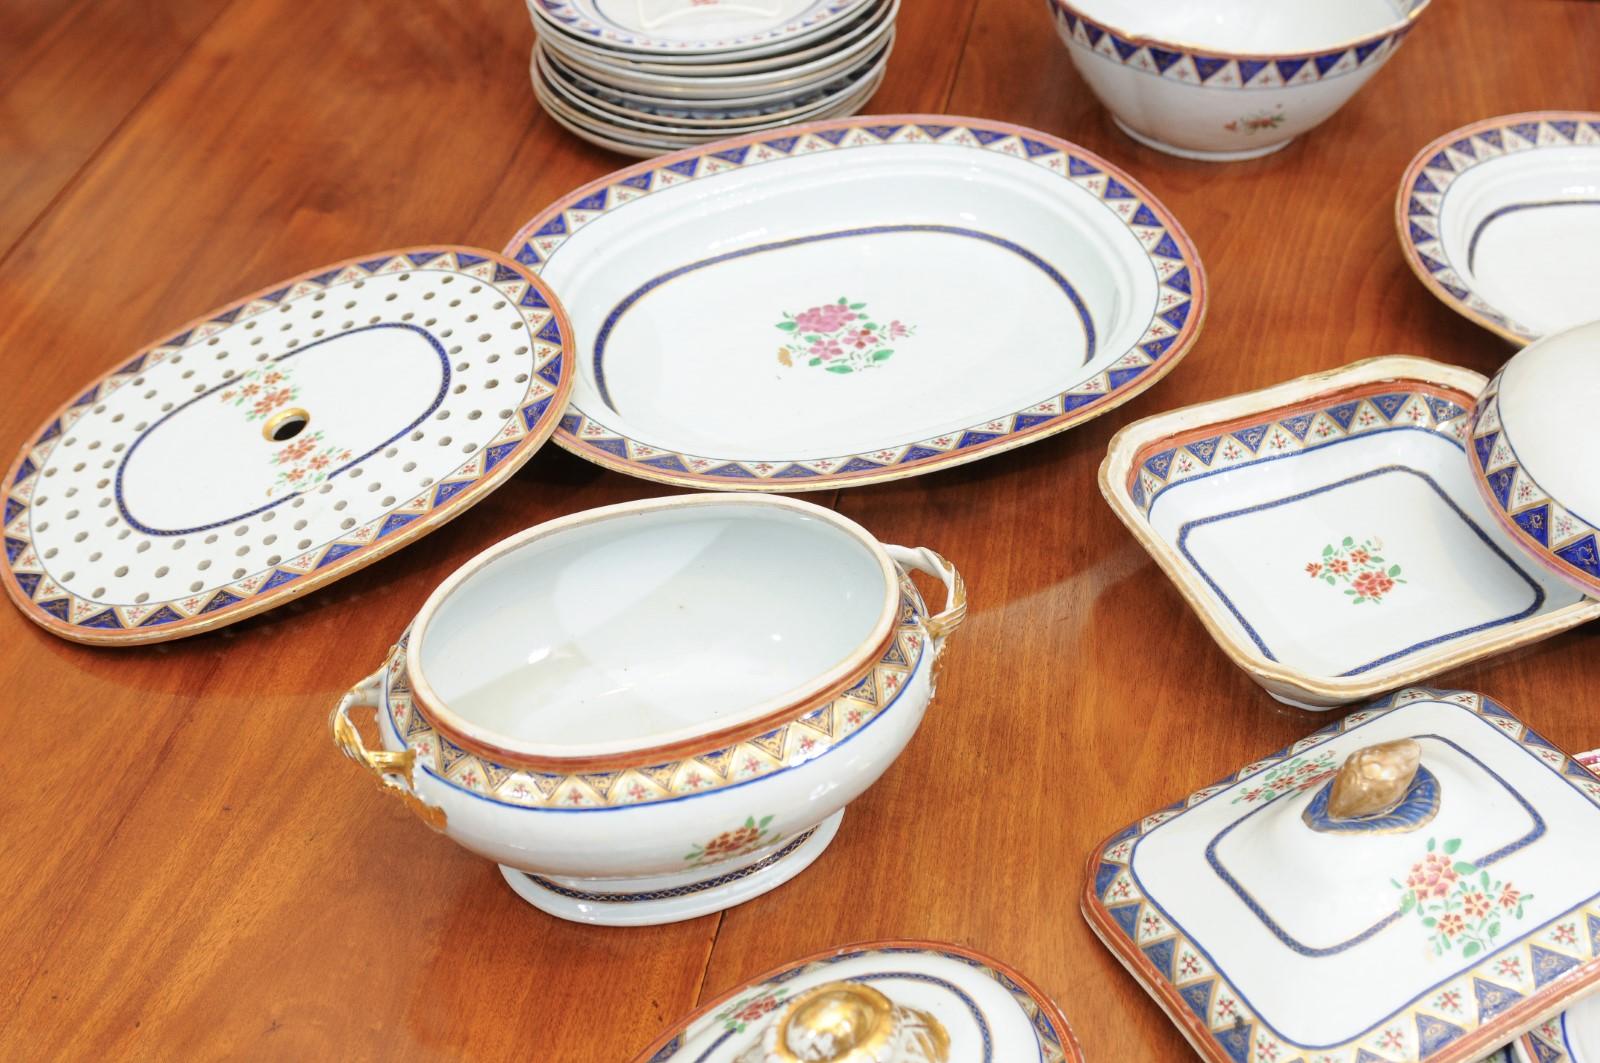 19th C. Chinese Export Famille Rose Porcelain Part-Dinner Service, 45 Piece Set For Sale 1